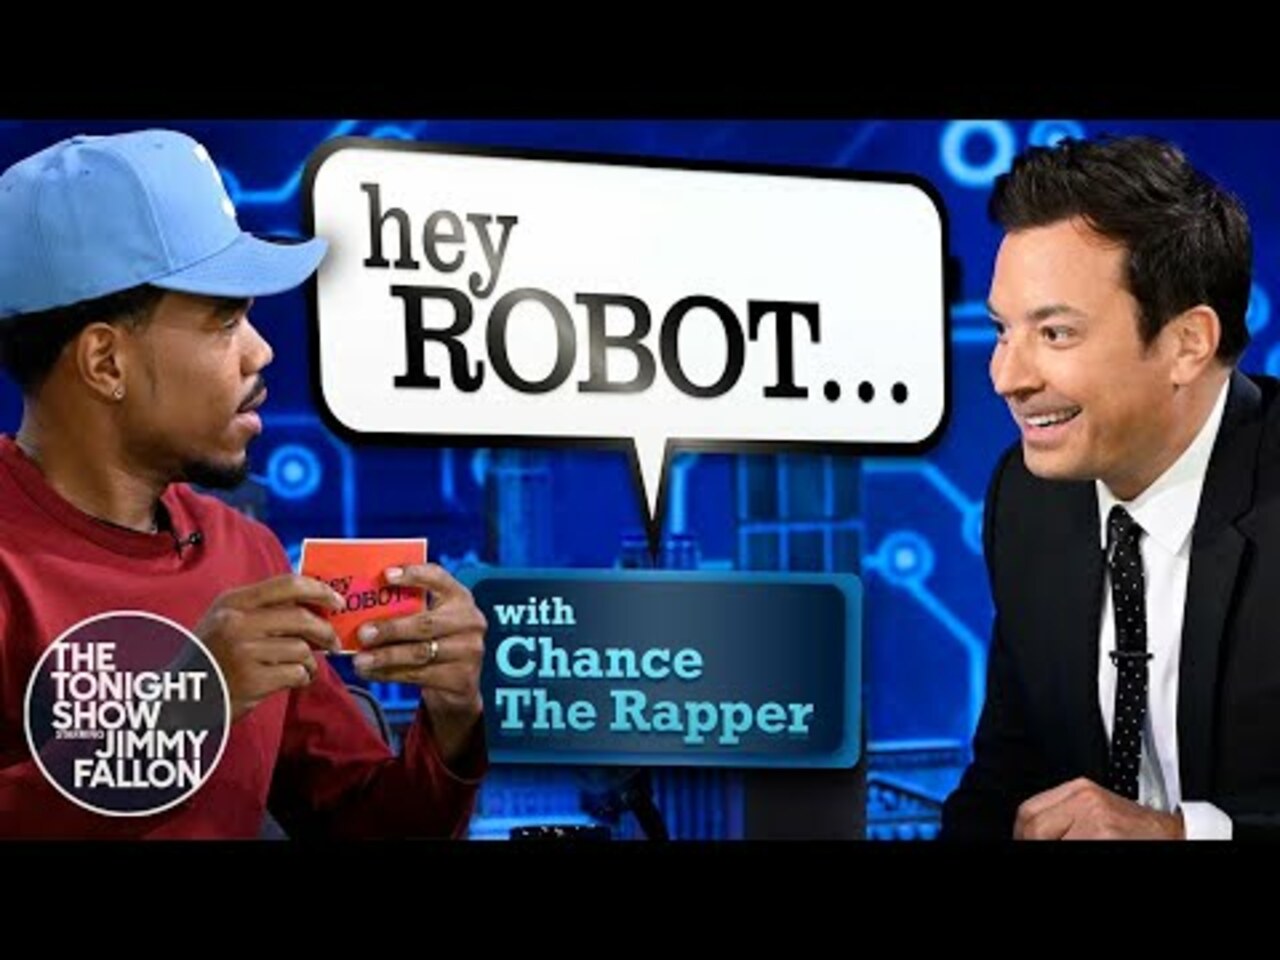 Hey Robot with Chance the Rapper | The Tonight Show Starring Jimmy Fallon